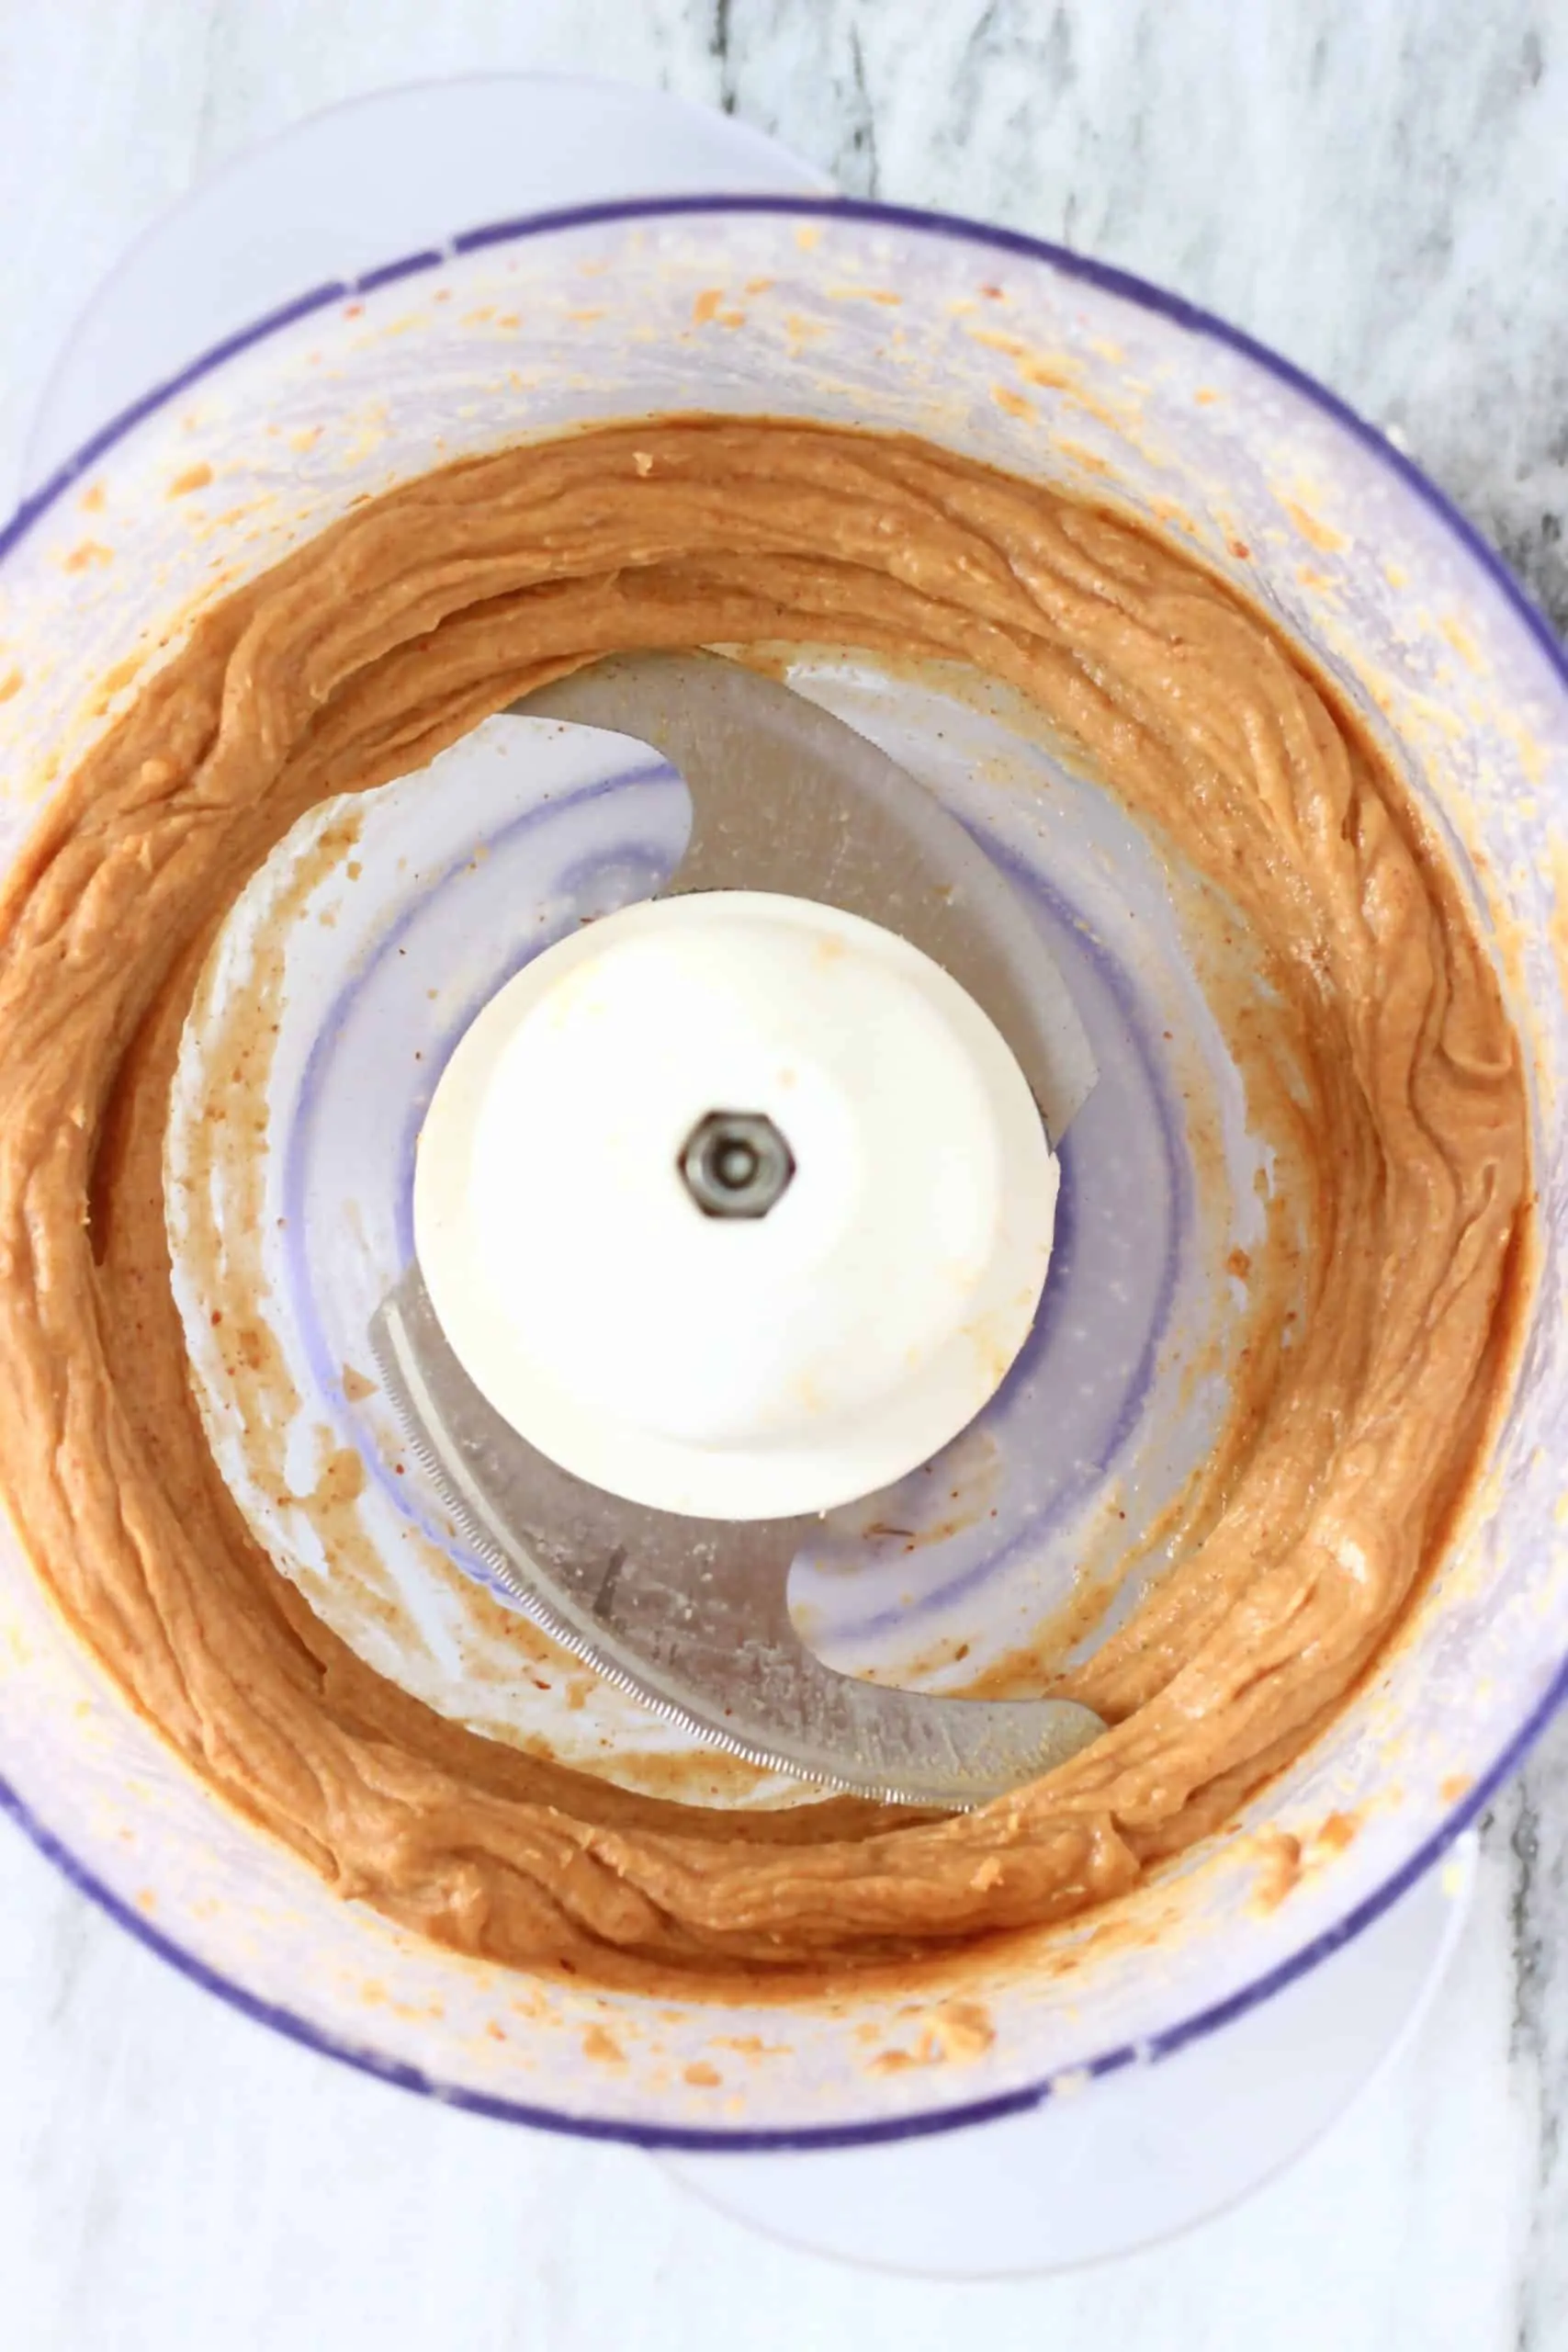 Blended dates and peanut butter in a food processor